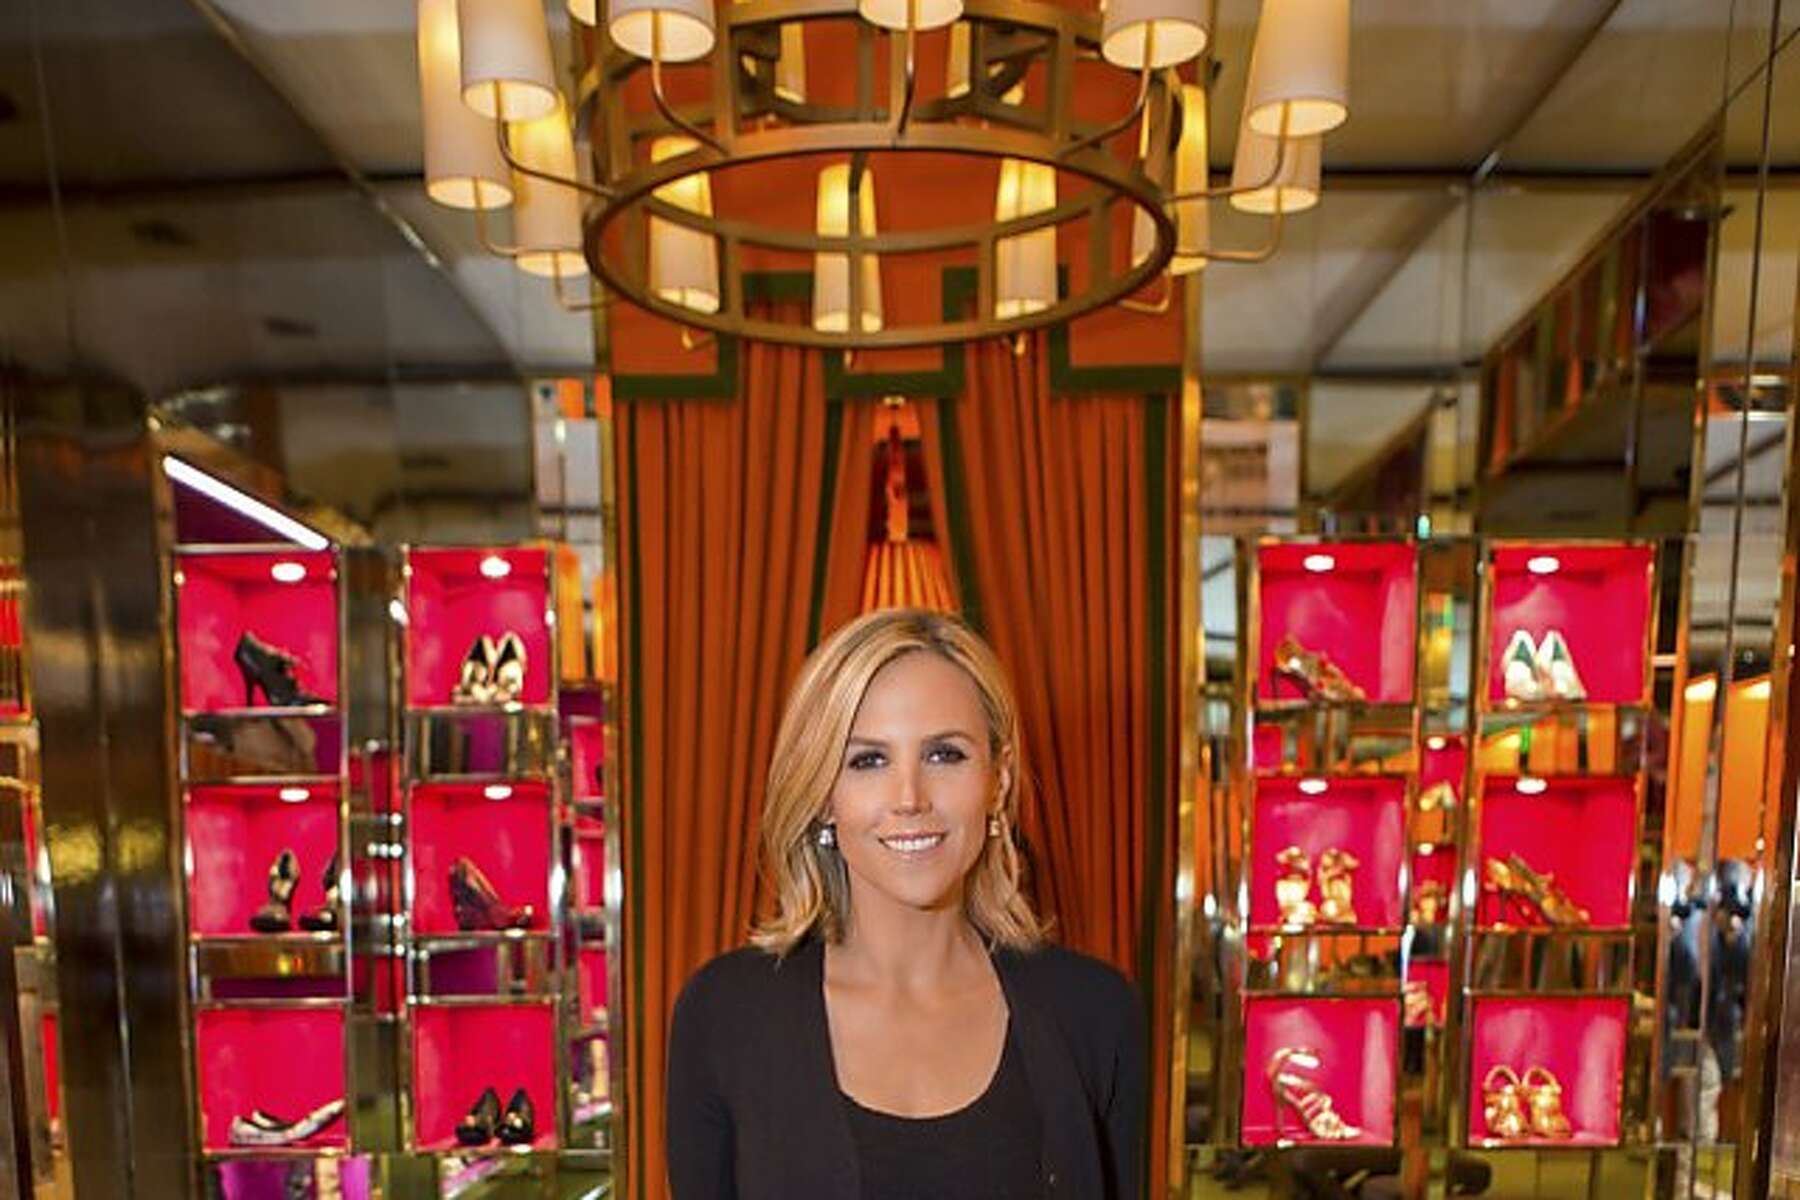 Tory Burch, Billionaire? The Designer Known for Her Ballet Flats